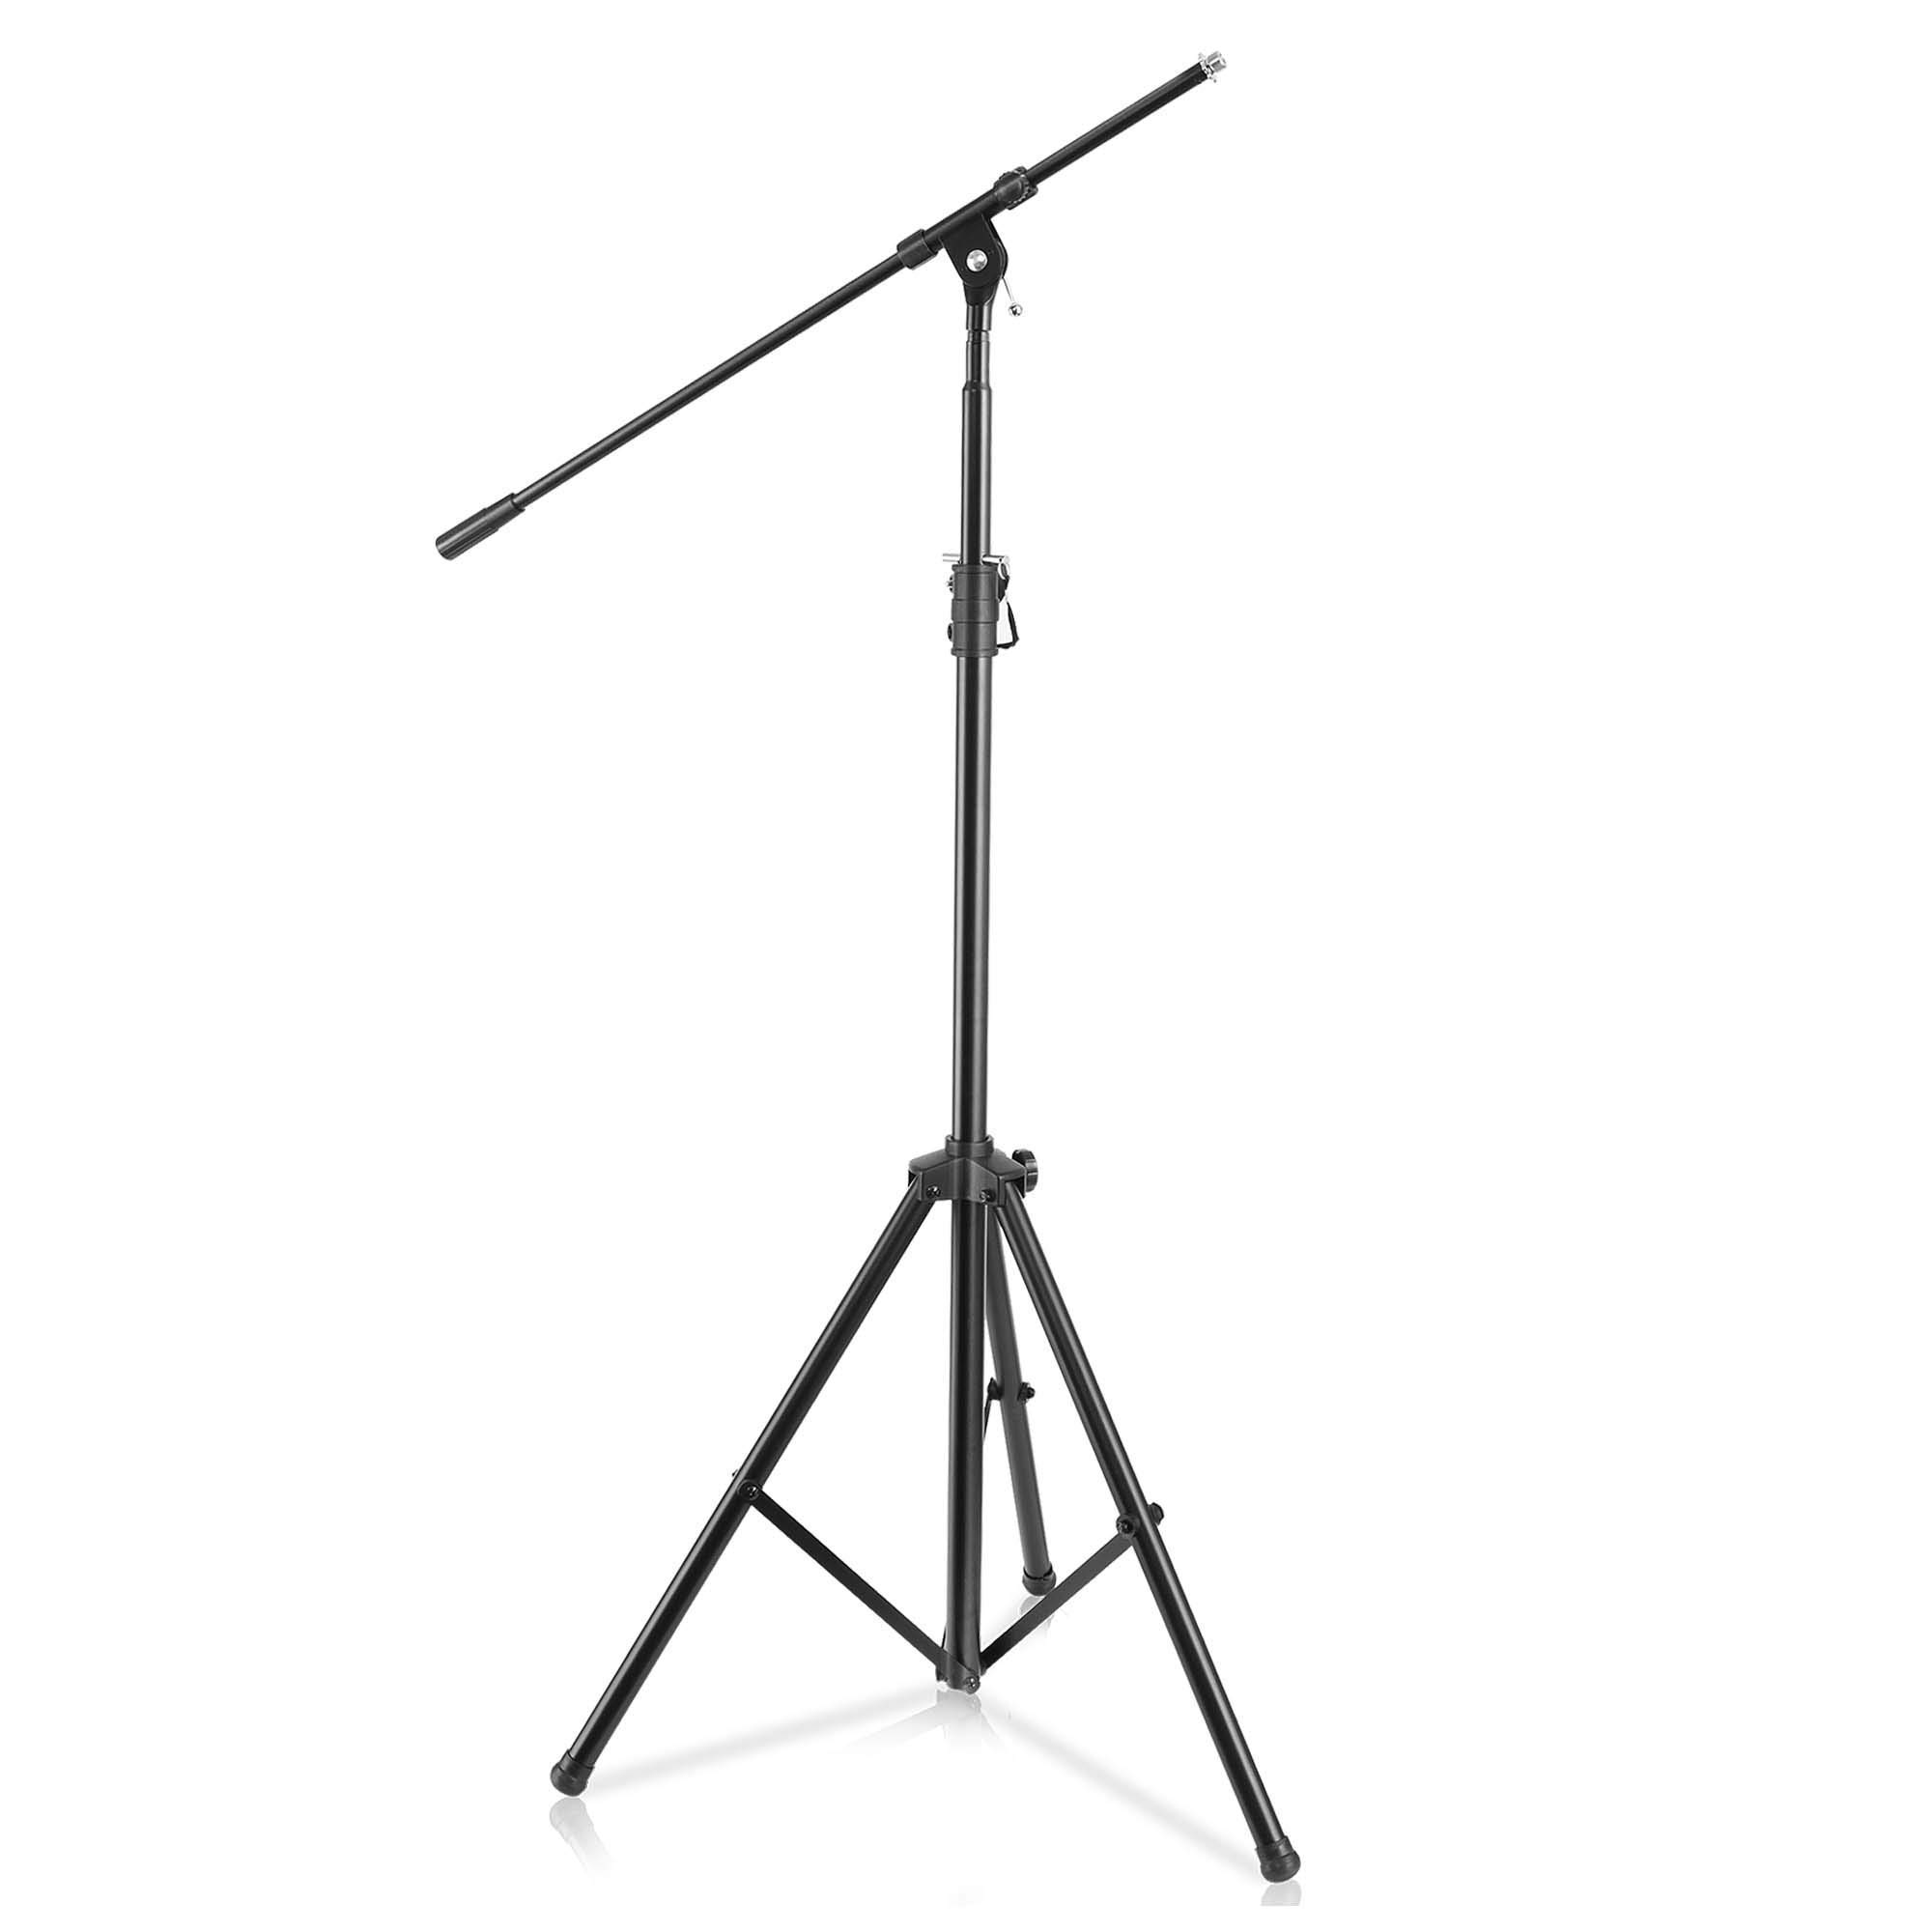 Book Cover Pyle Heavy Duty Microphone Stand - Height Adjustable from 51.2'' to 78.75'' Inch High w/ Extendable Telescoping Boom Arm 29.5'' and Stable Tripod Base - Clutch in T-Bar Adjustment Point PMKS56